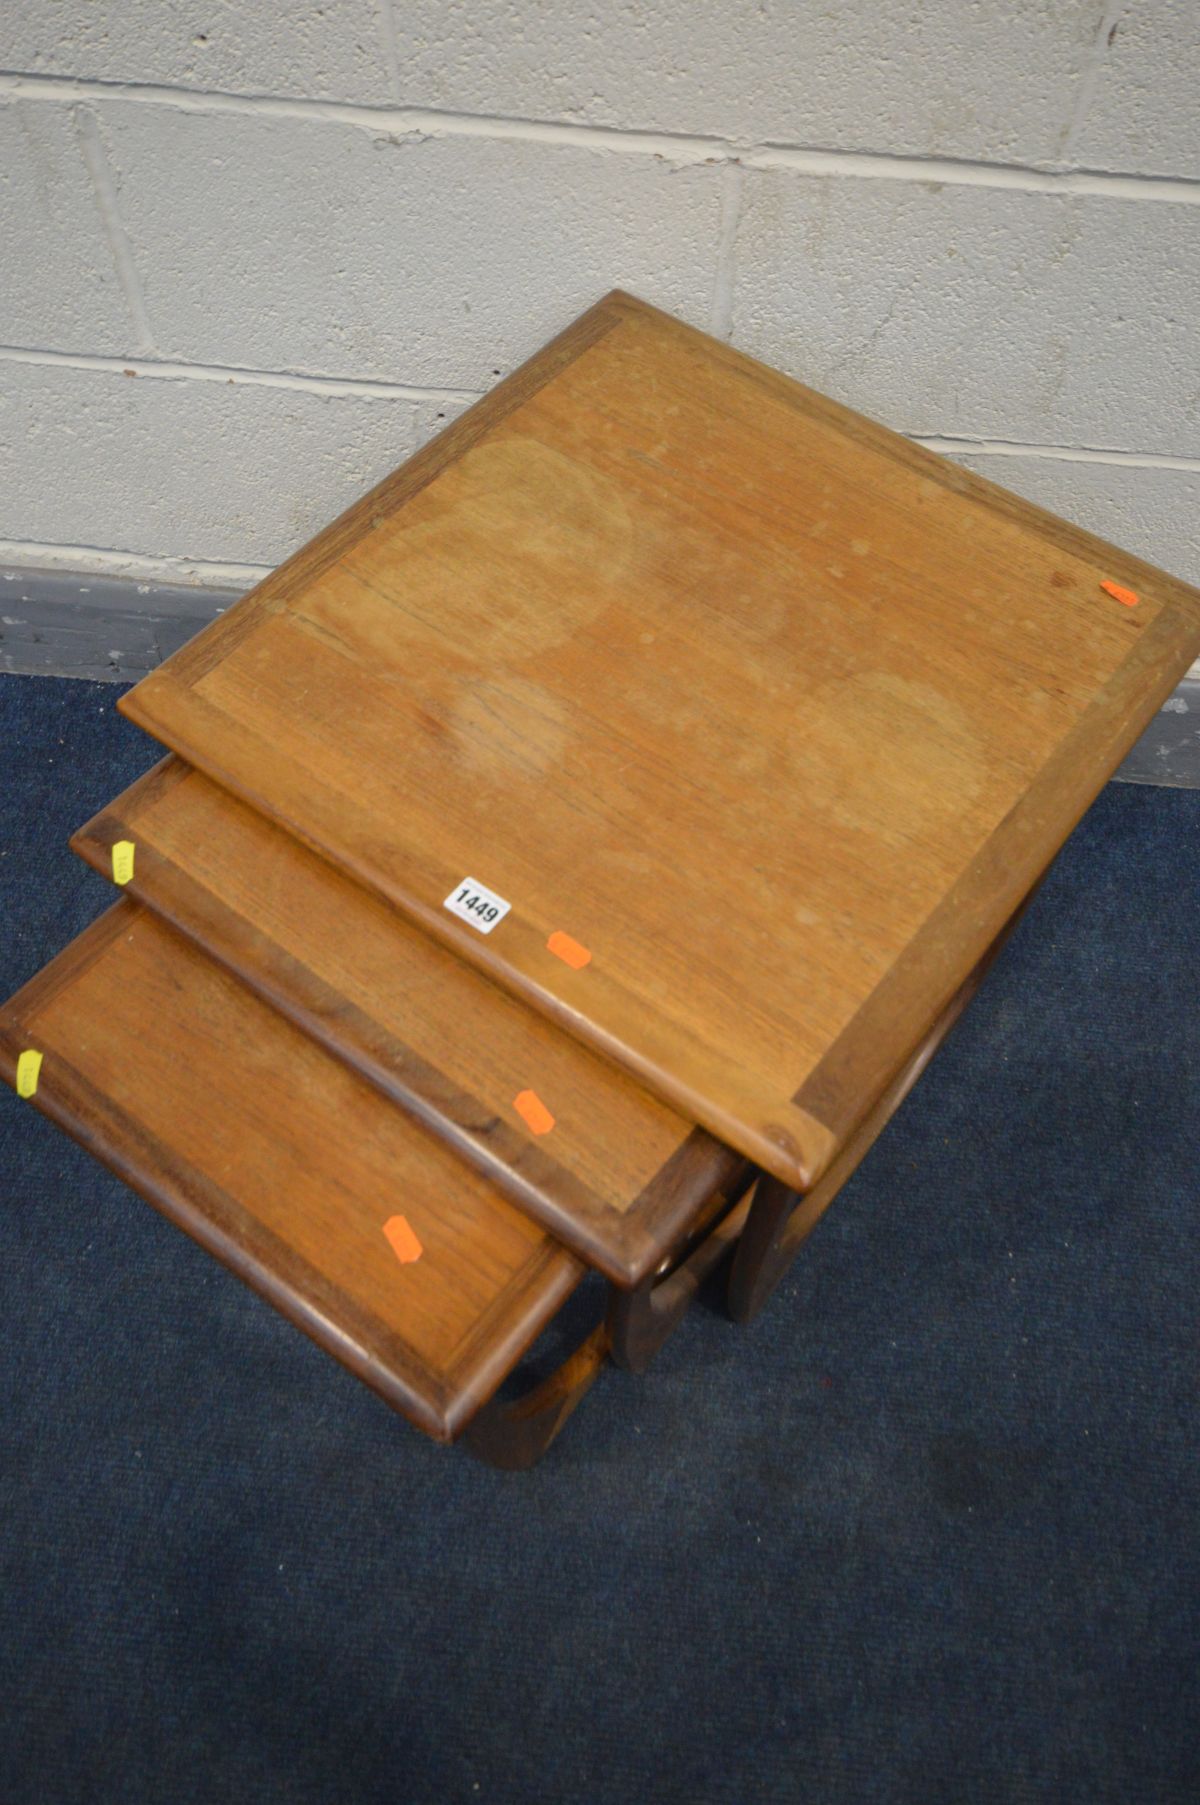 A G PLAN FRESCO TEAK NEST OF THREE TABLES (condition:- fluid stains to each table) - Image 2 of 2